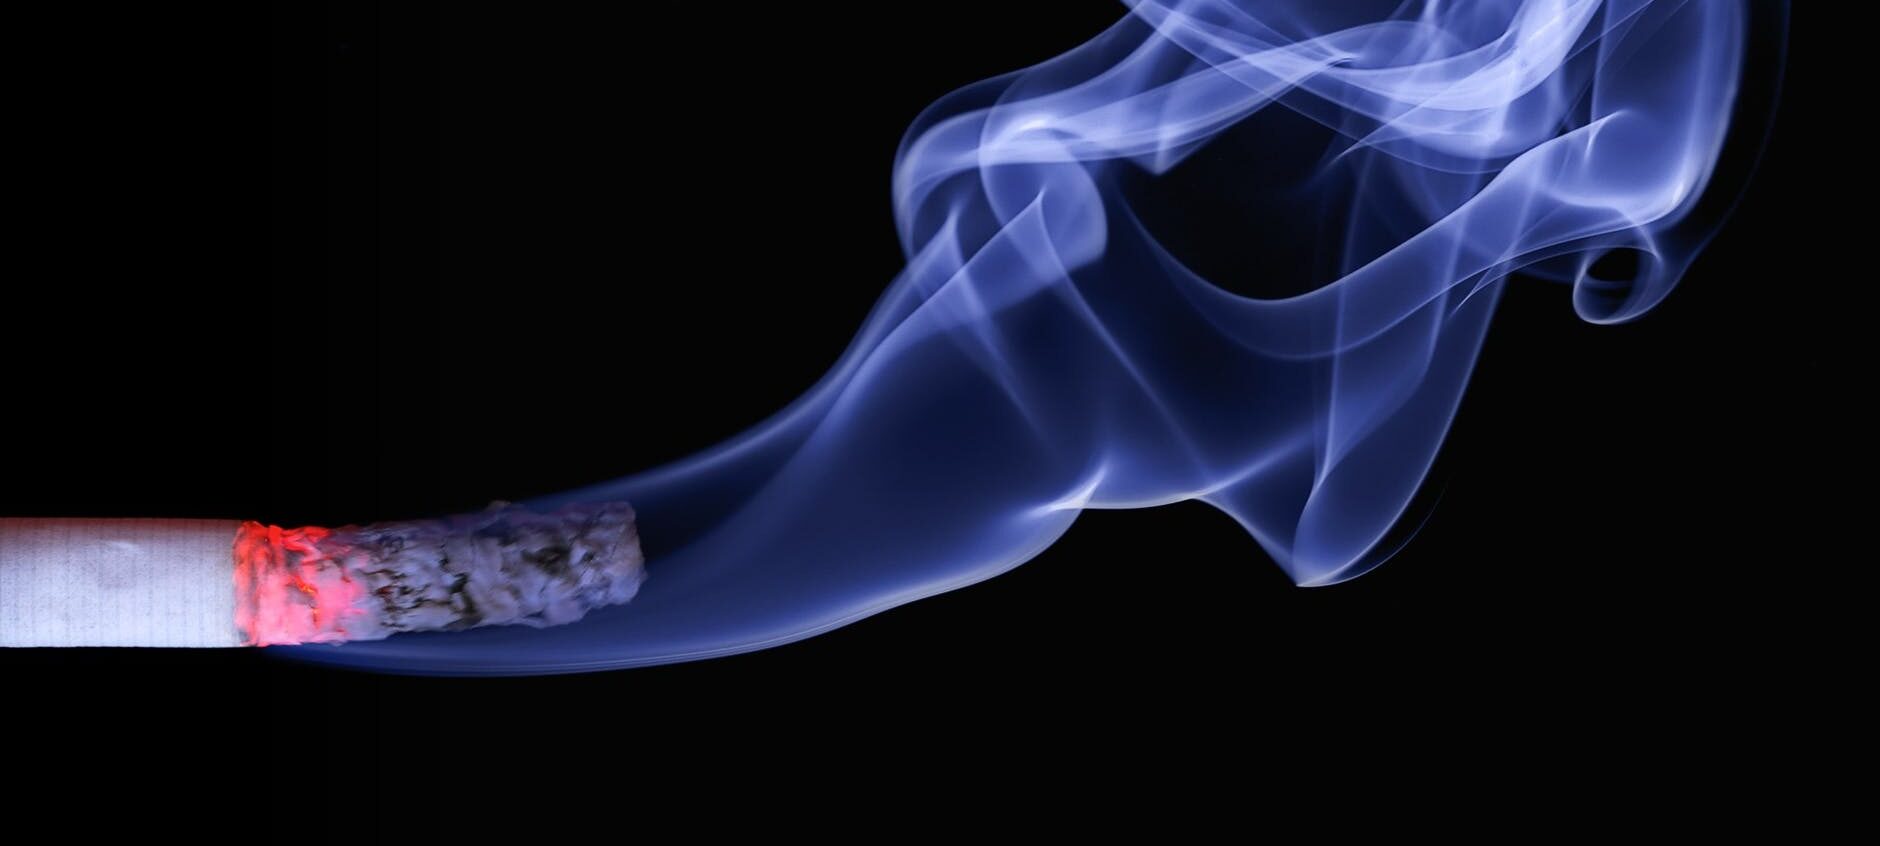 close up photo of lighted cigarette stick showing smoke fumes